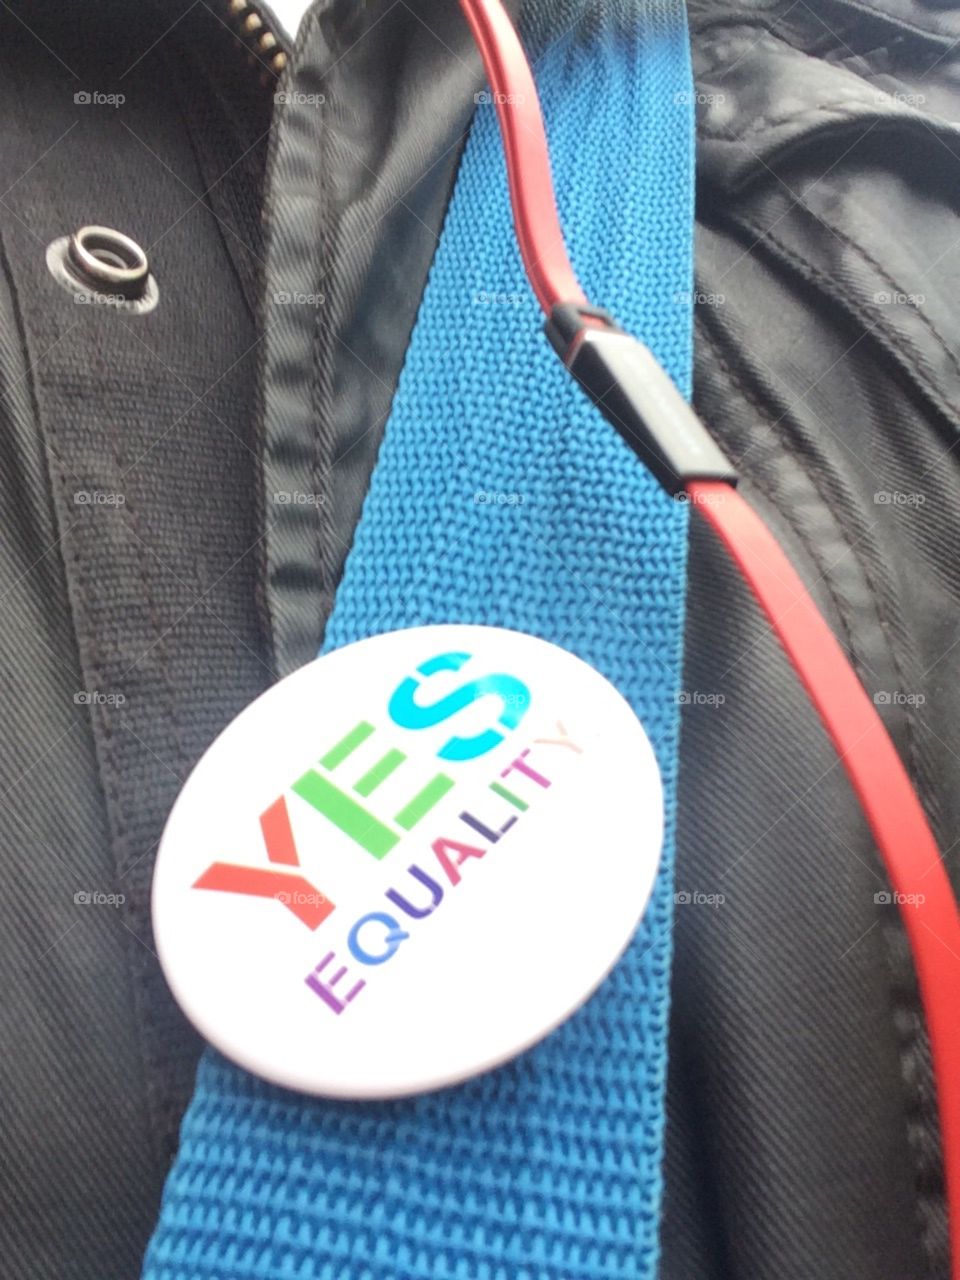 Yes to Equality